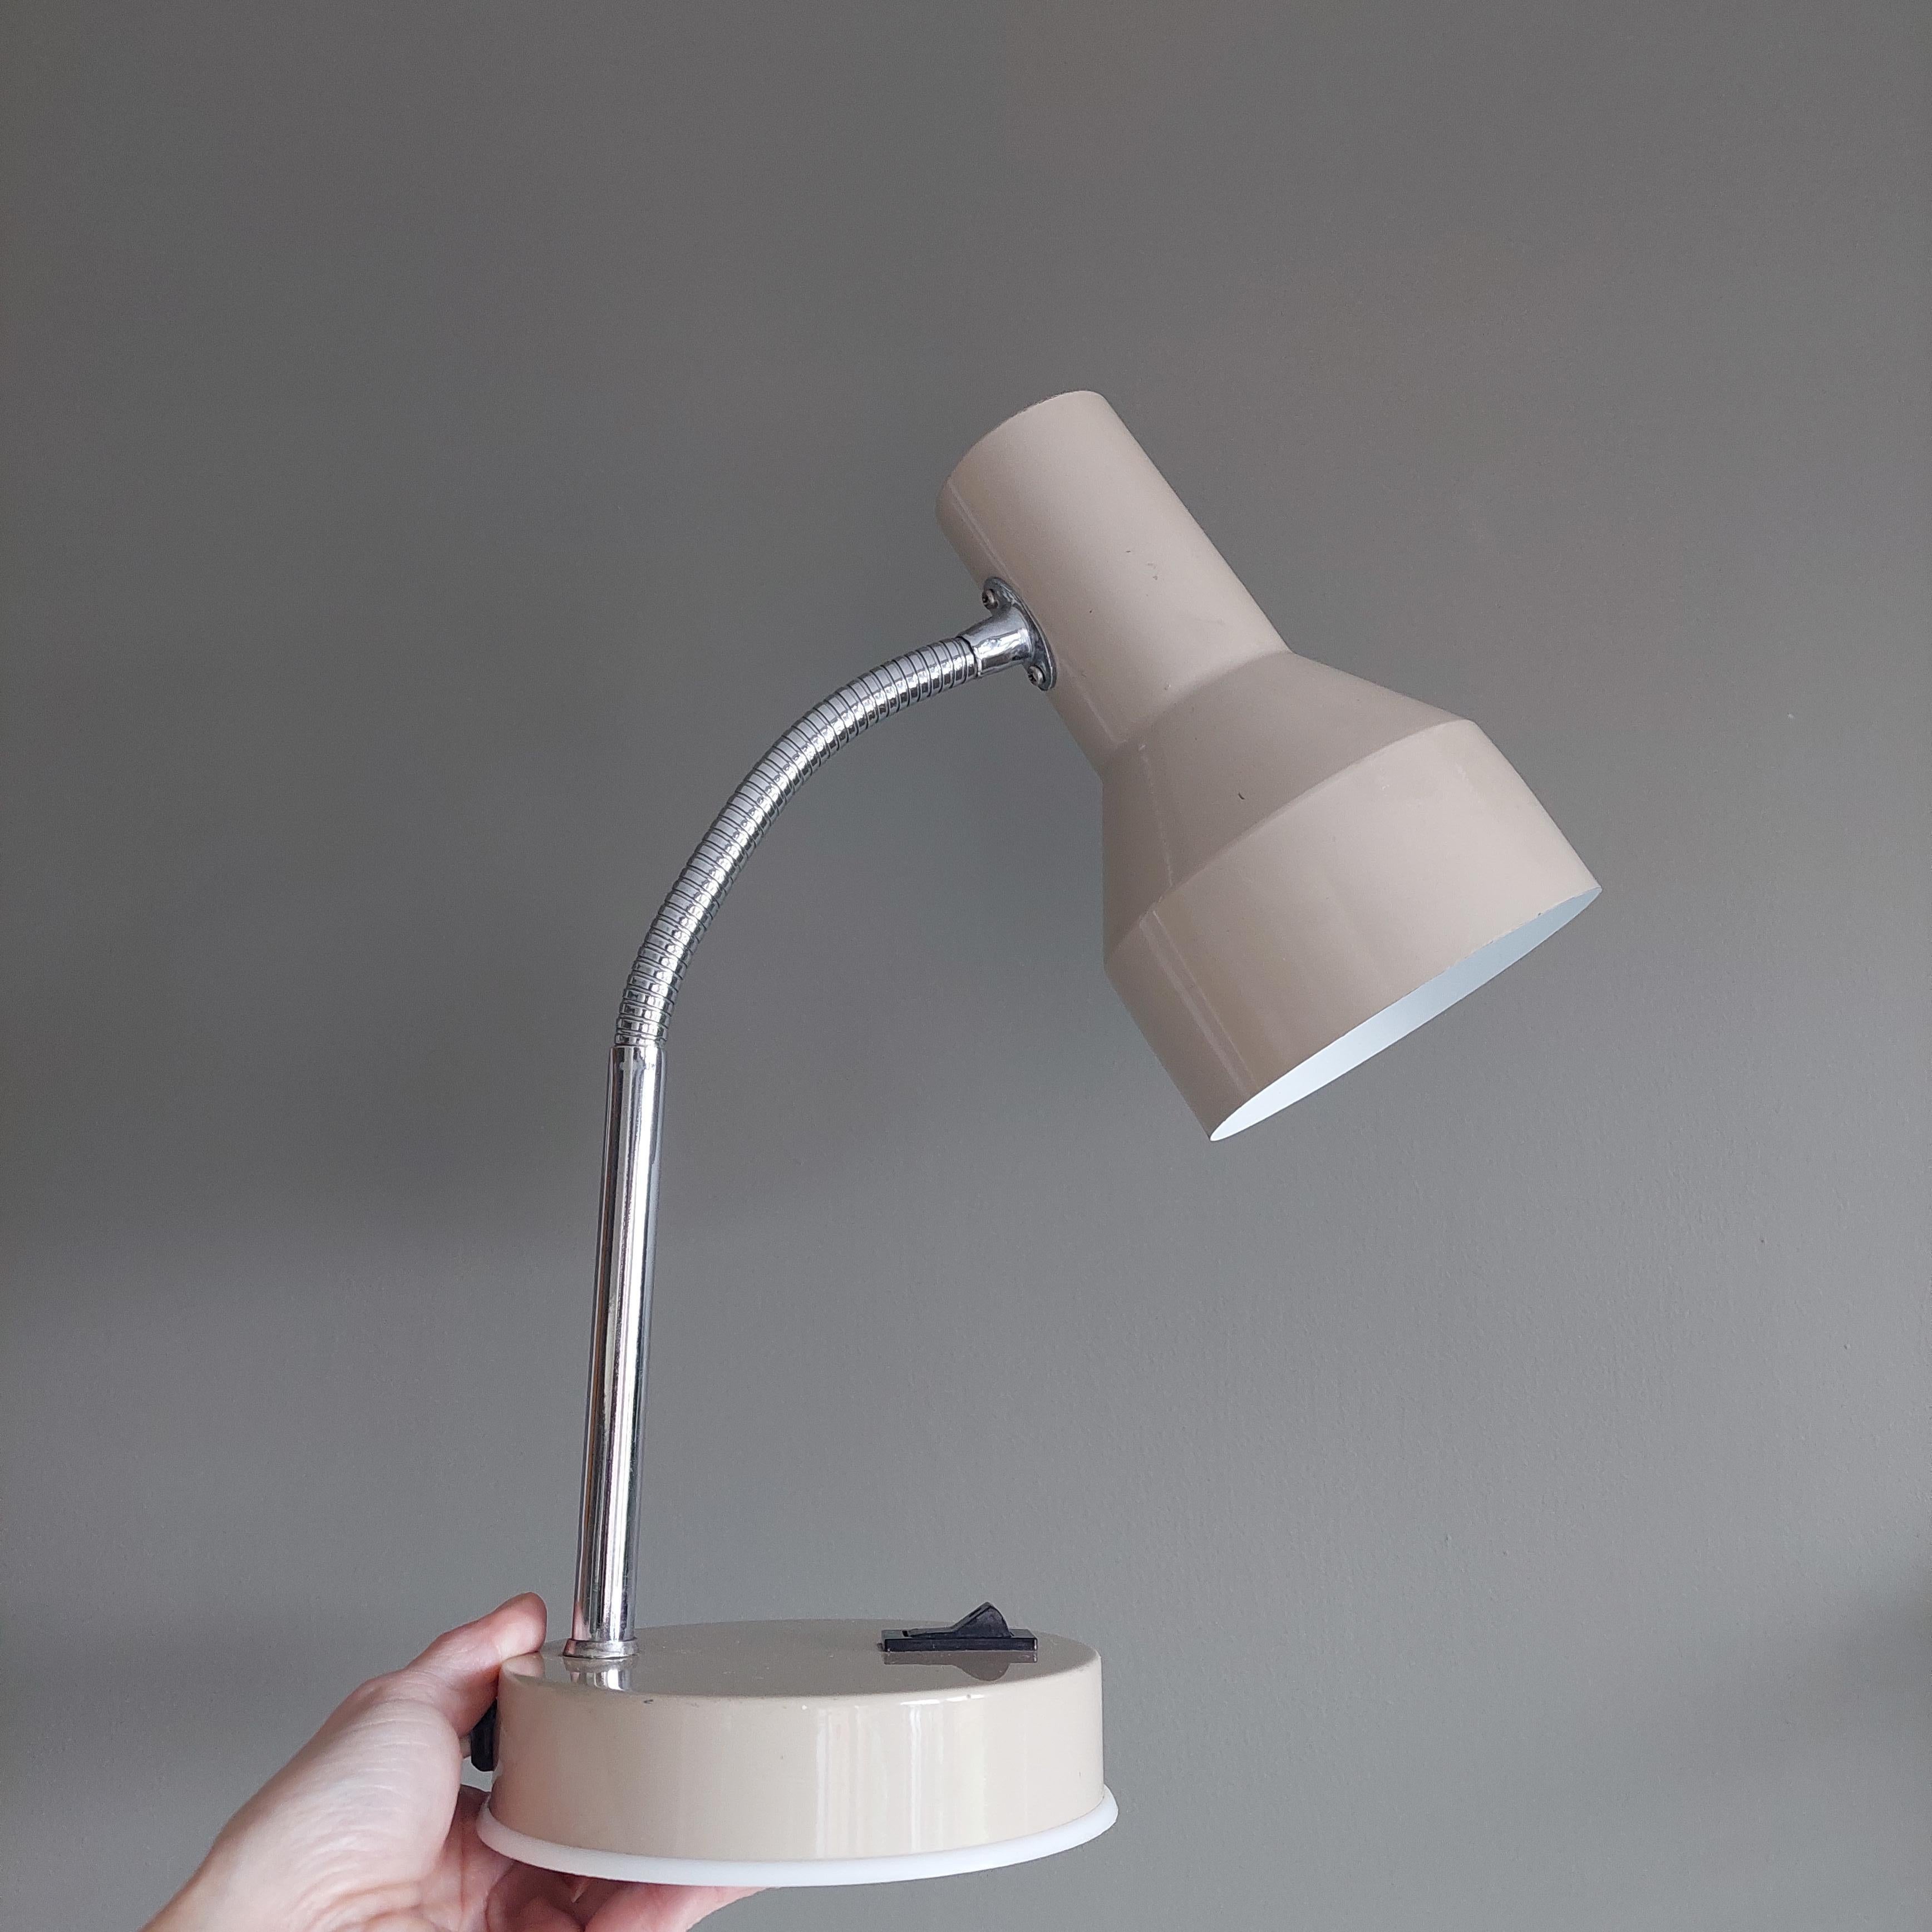 1970s Retro Desk Lamp made in the style of Veneta Lumi for BHS
Vintage beige/light mushroom coloured metal desk lamp Bauhaus style mid-century.

The arm and shade are adjustable, making the lamp well-suited for reading.
Painted metal shade and